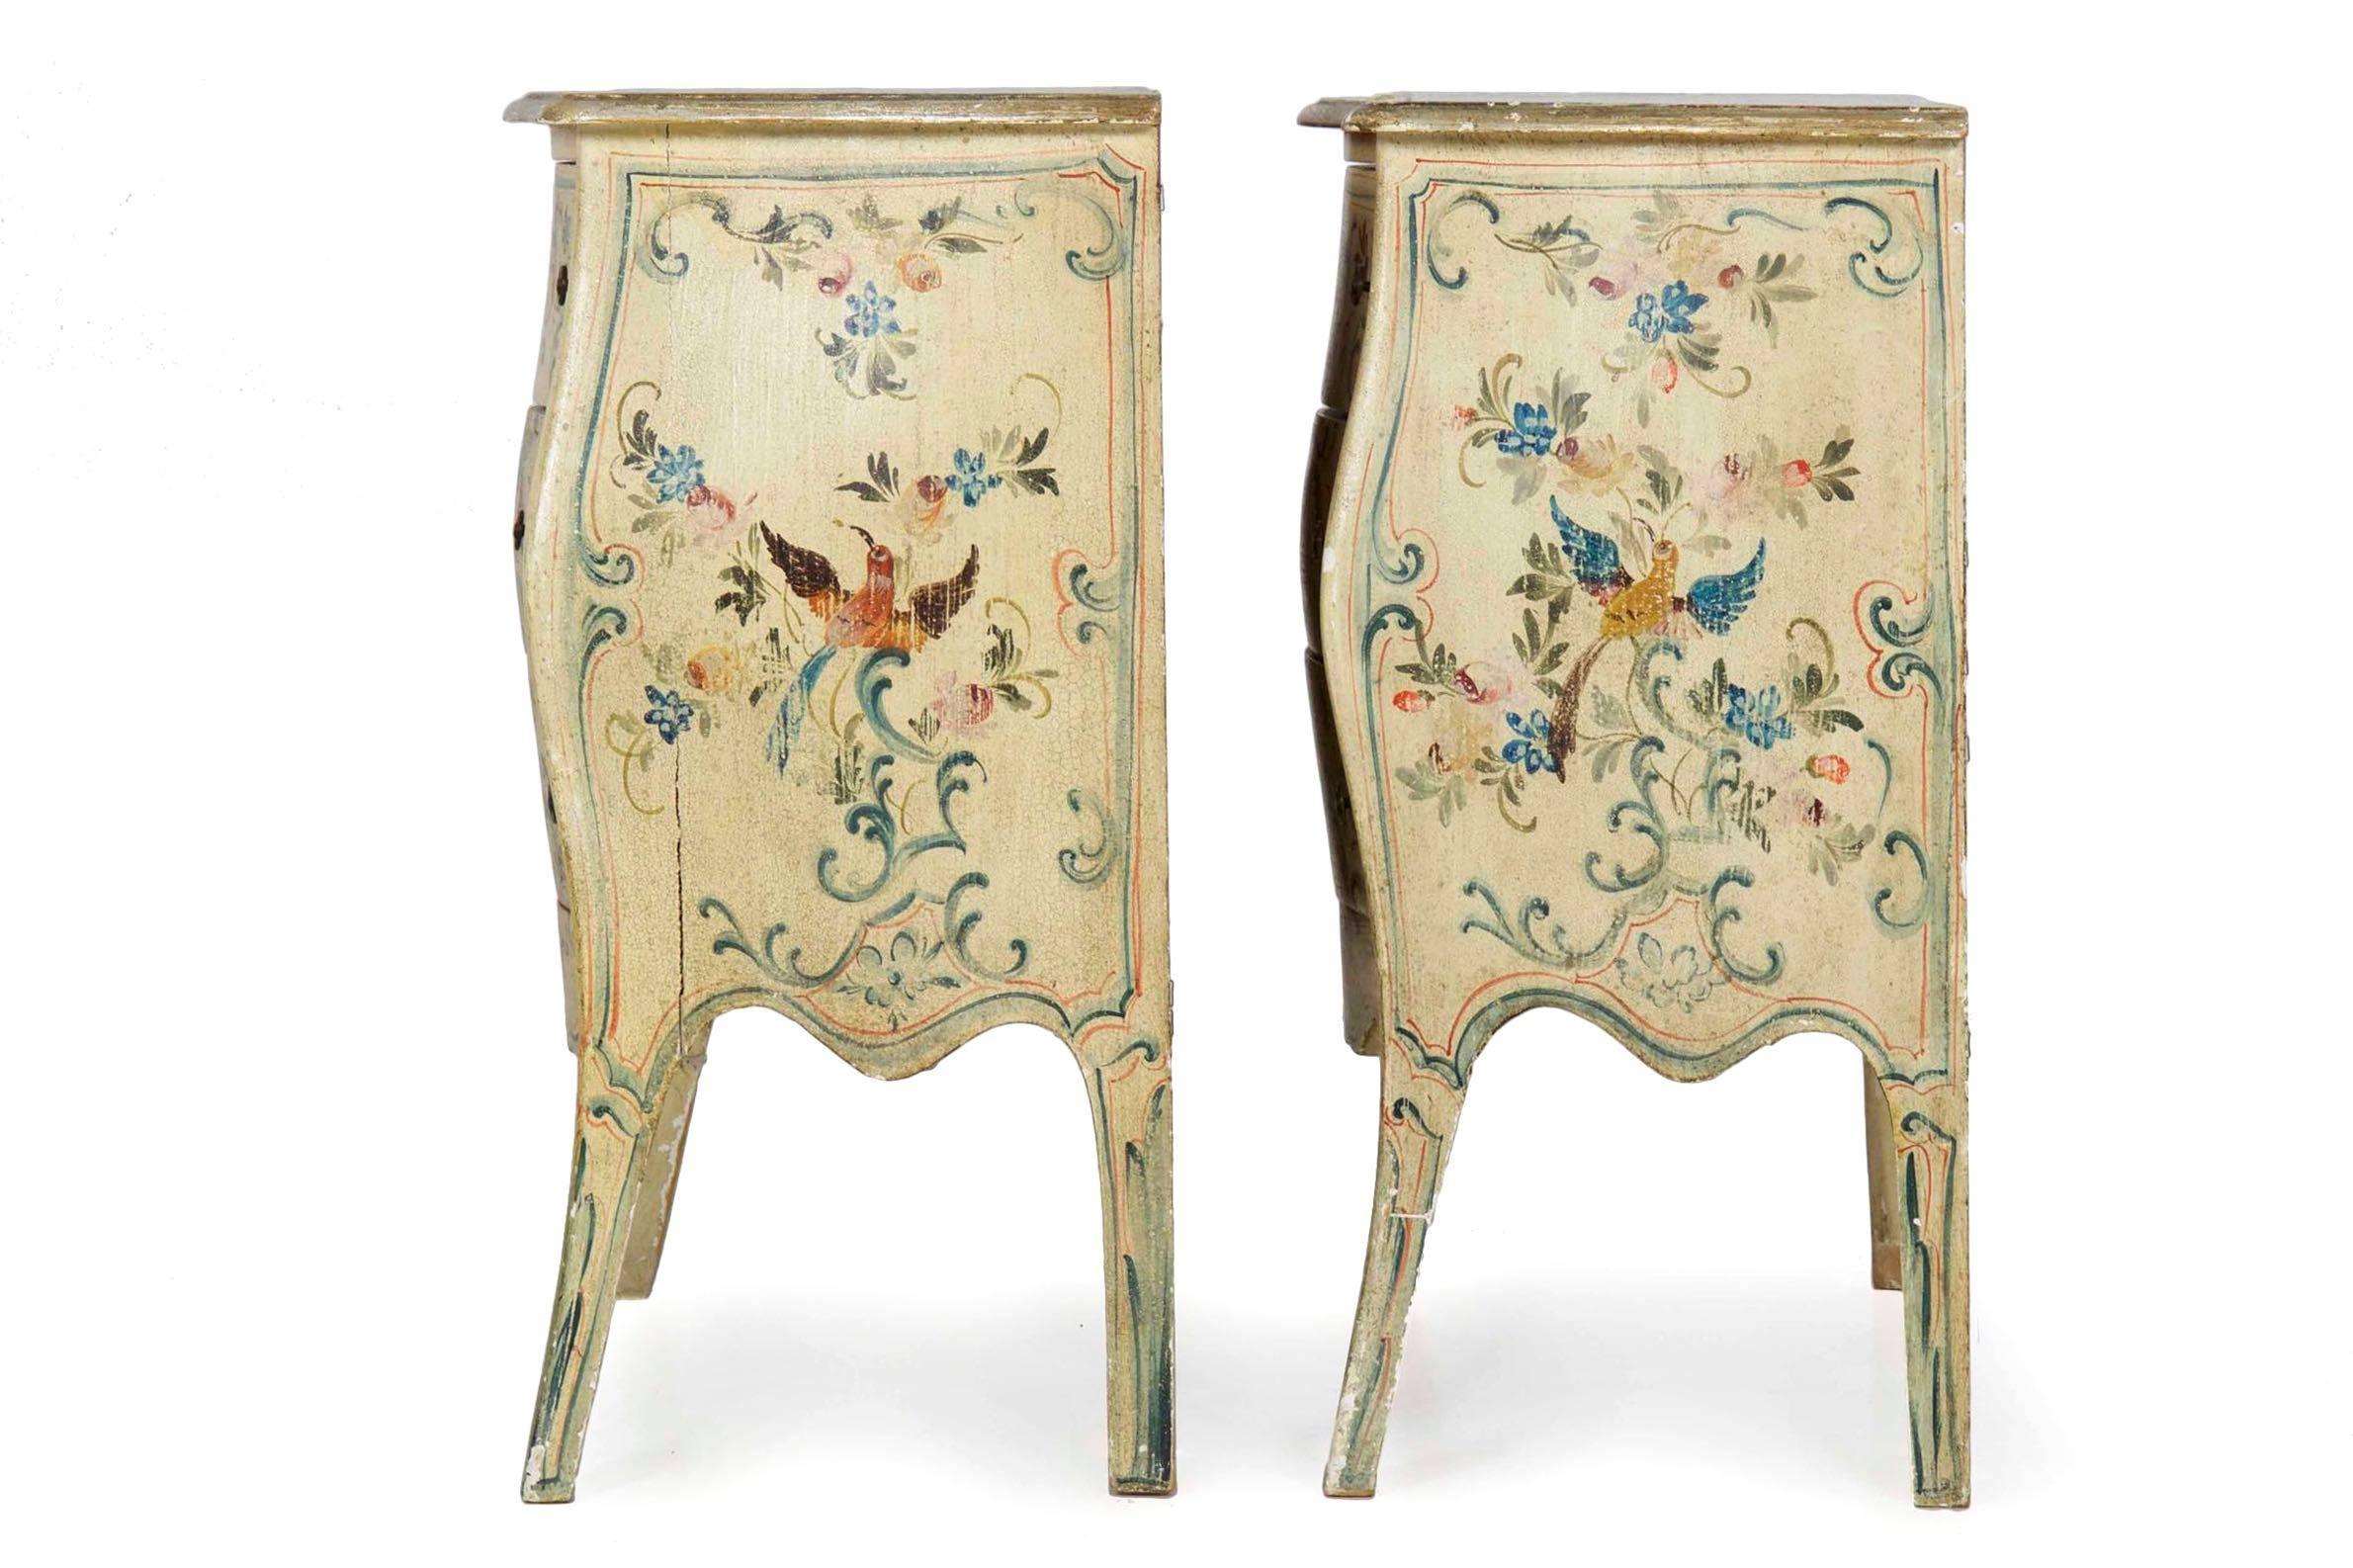 Italian Pair of Venetian Rococo Hand-Painted Bedside Nightstand Commodes